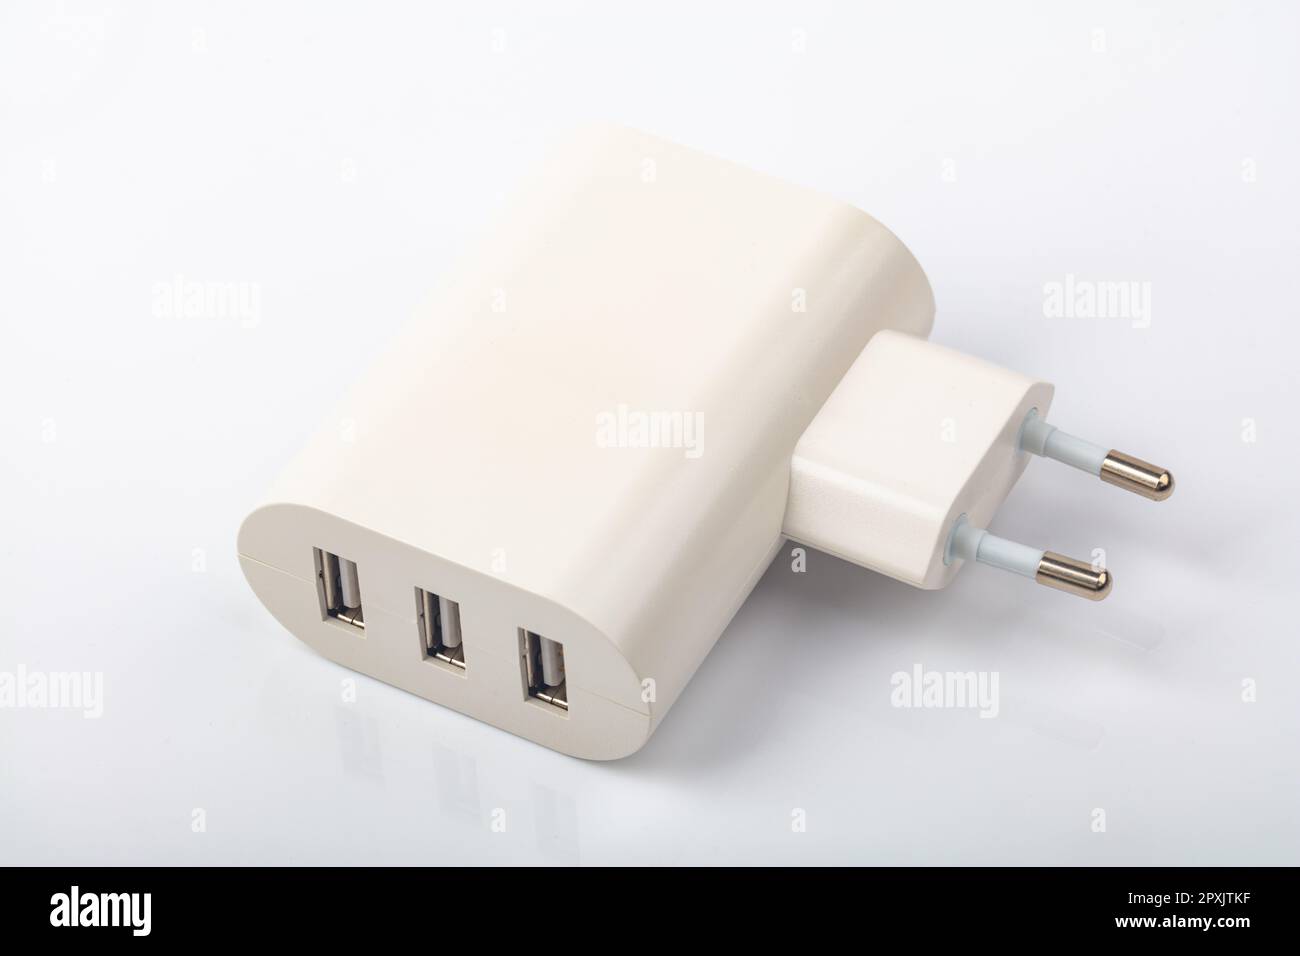 White USB Power Socket with three usb charging connectors over bright background Stock Photo